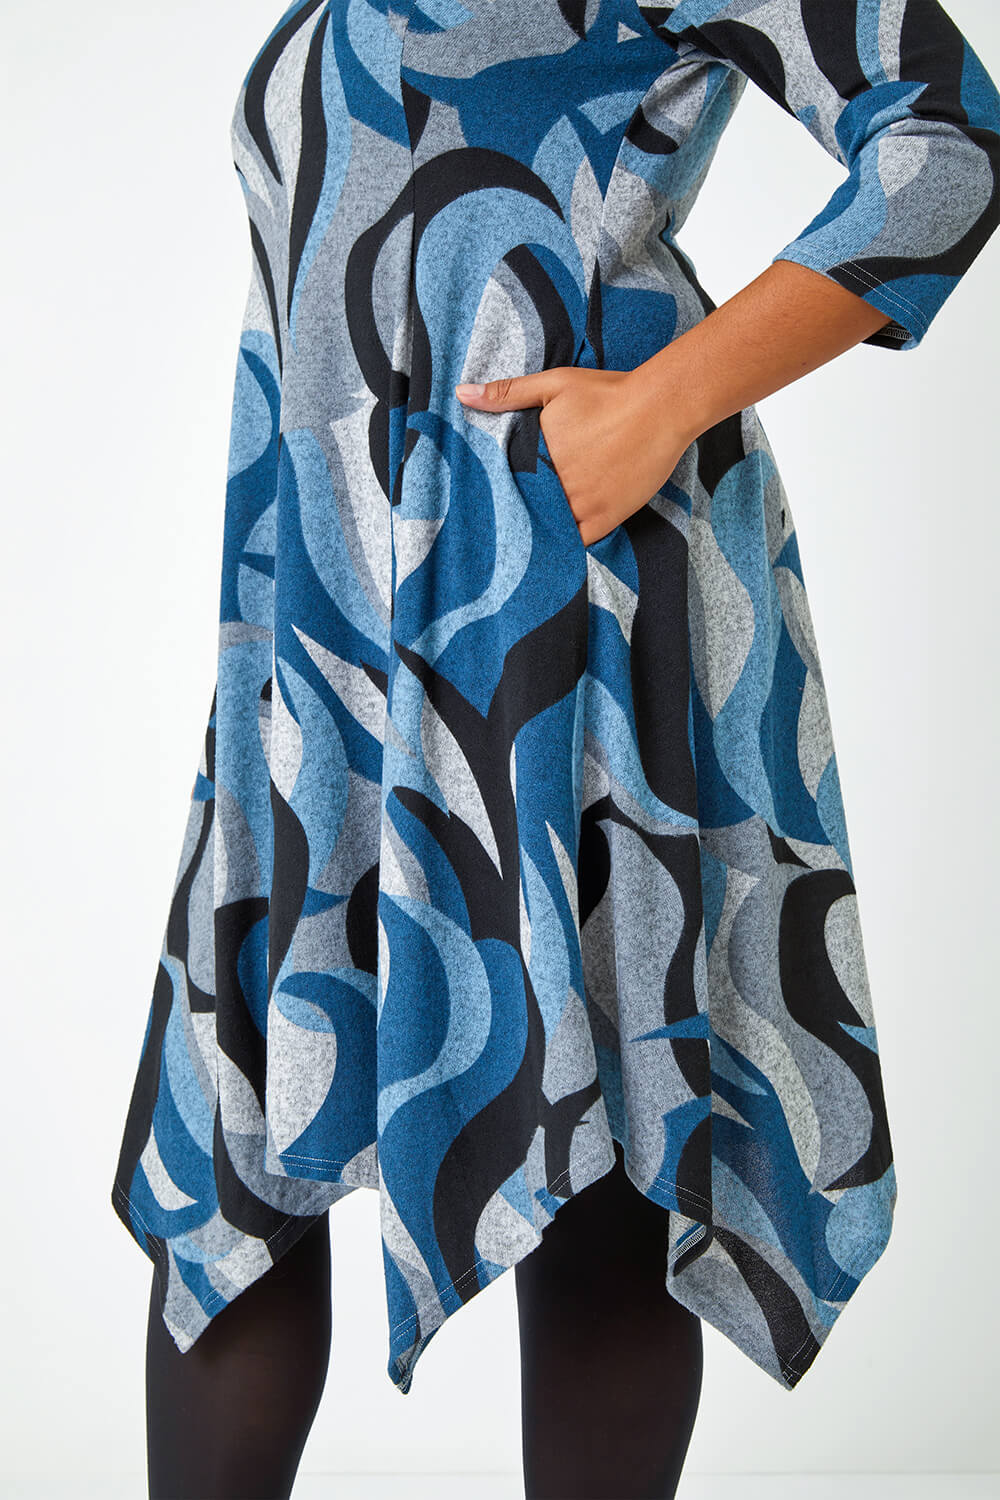 Blue Curve Abstract Print Tunic Stretch Dress, Image 5 of 5